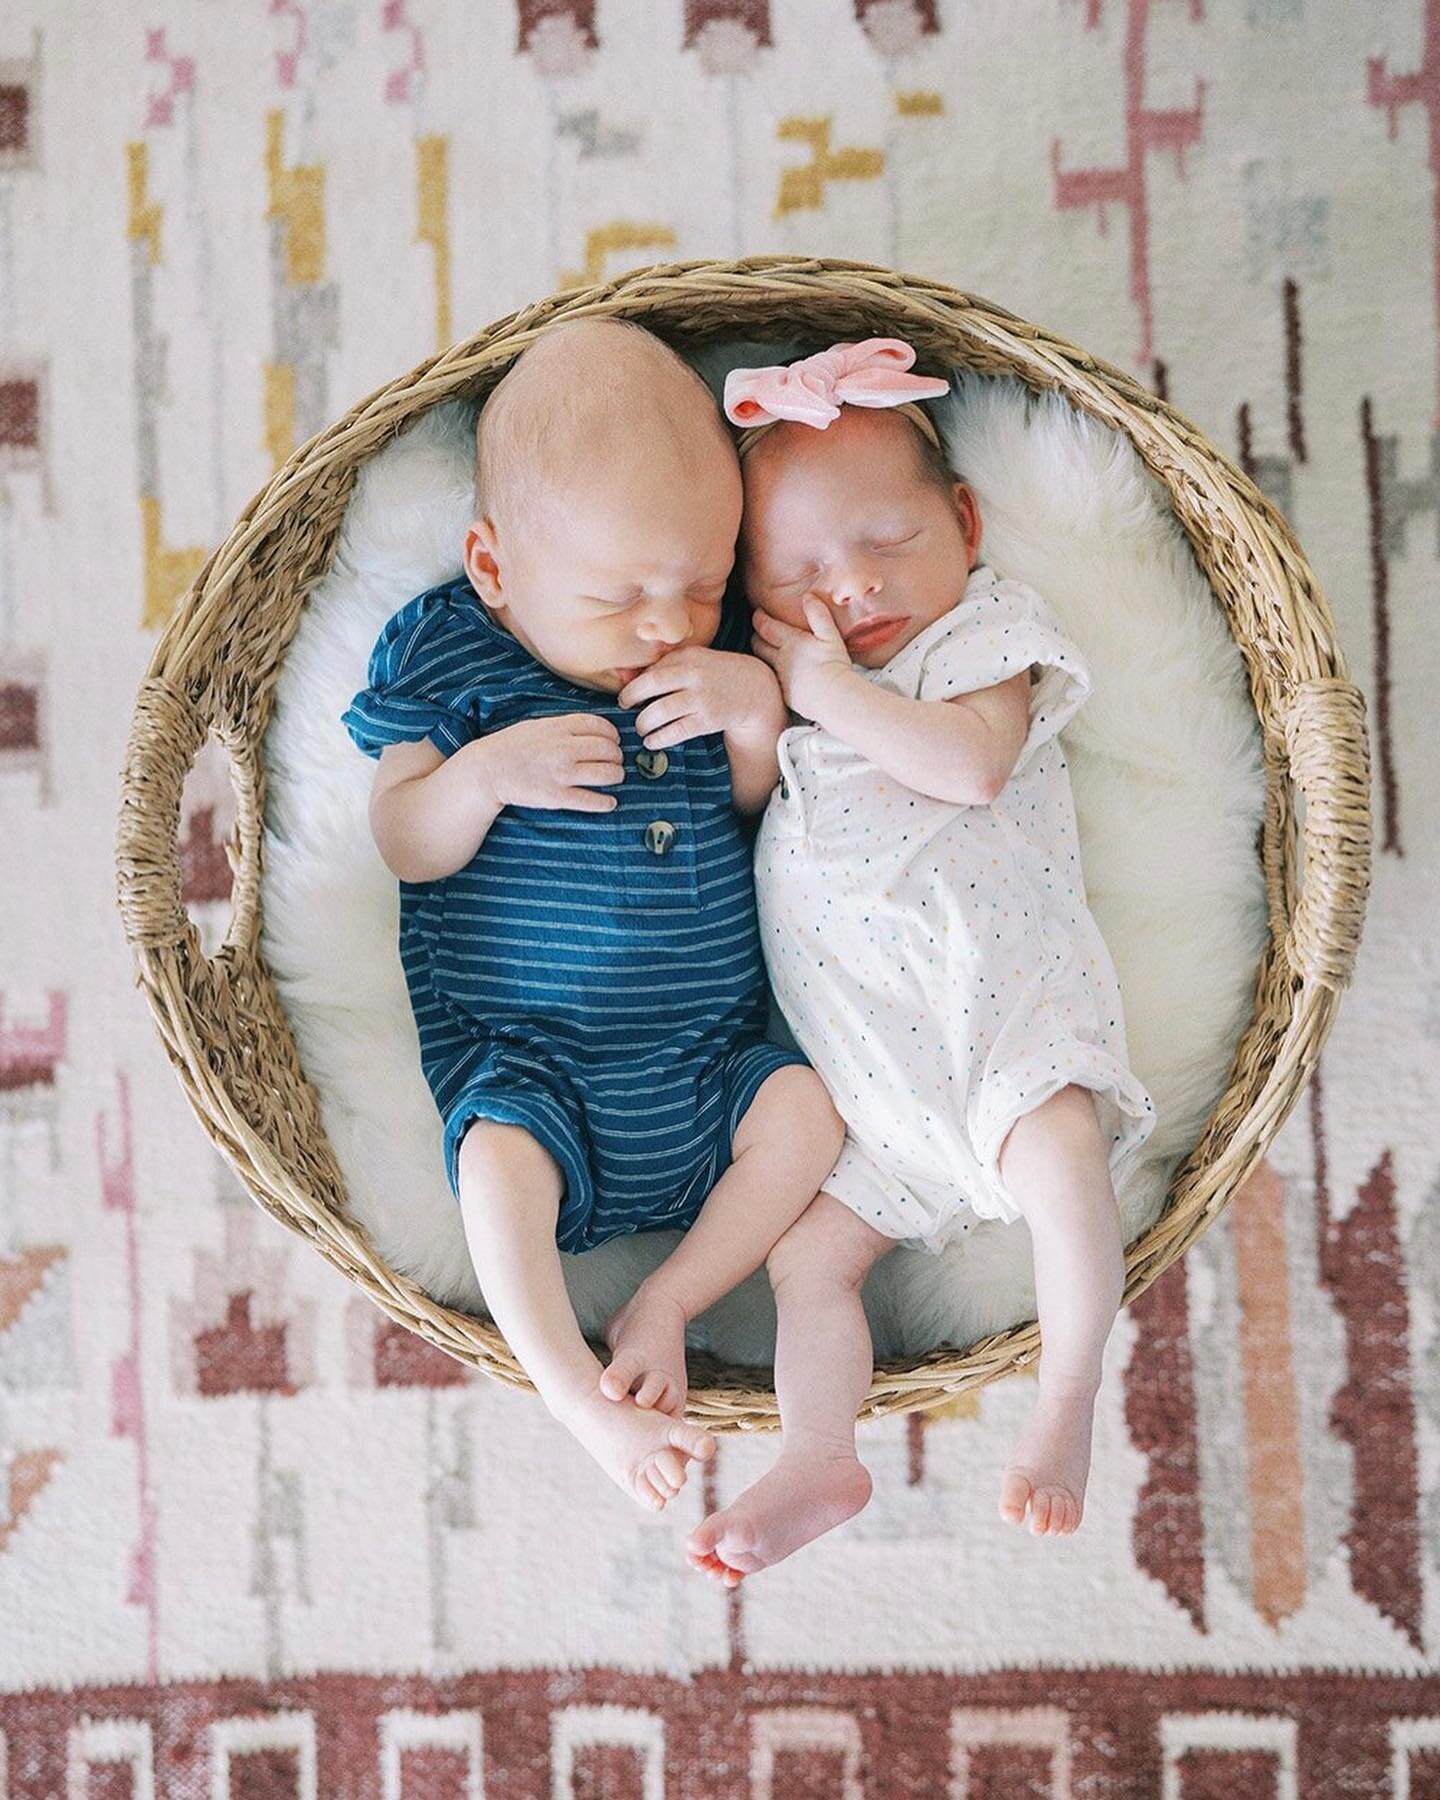 Wishing a very happy first birthday to Maeve and Finn! 

I love when clients are friends as I&rsquo;ve been able to watch these cuties grow into their fun individual personalities. Fin is so cuddly and always happy and Maeve is miss independent! 

Ca